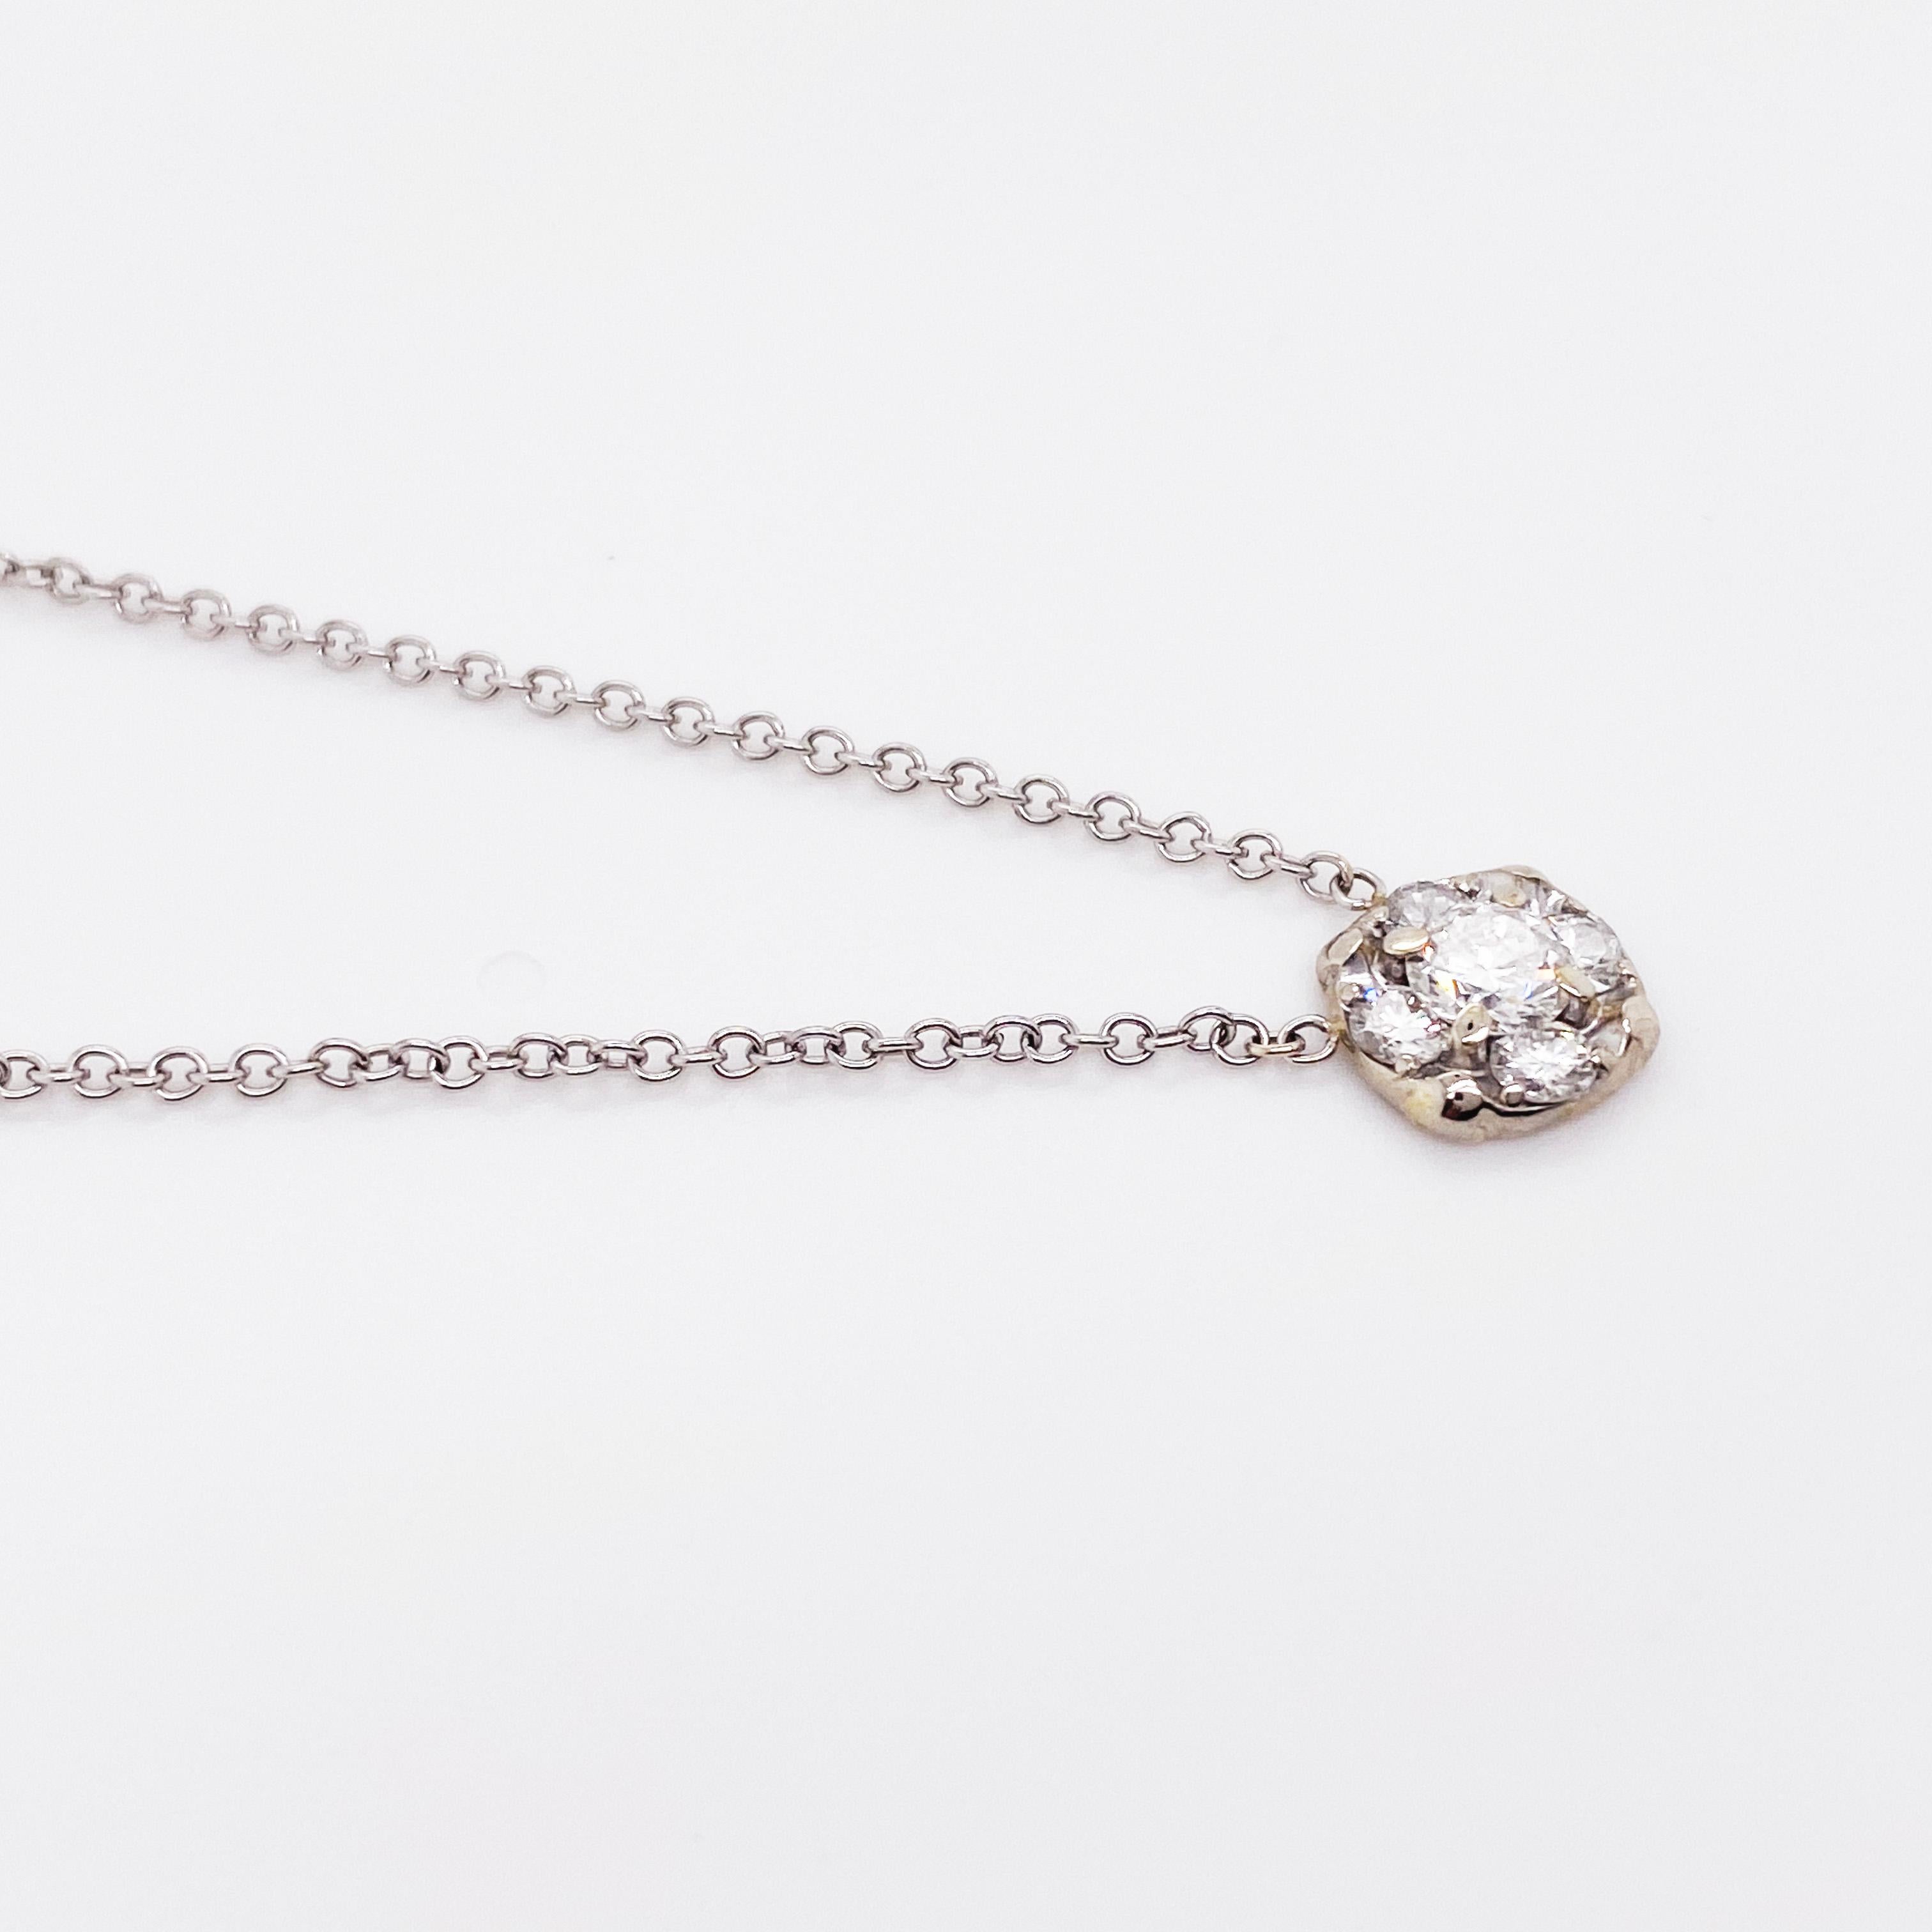 Diamond necklaces are fine jewelry staples. They are timeless and can be worn for every occasion! This diamond pendant has five round brilliant diamonds set in a clover-like shape with the largest diamond in the center. The diamonds are set in